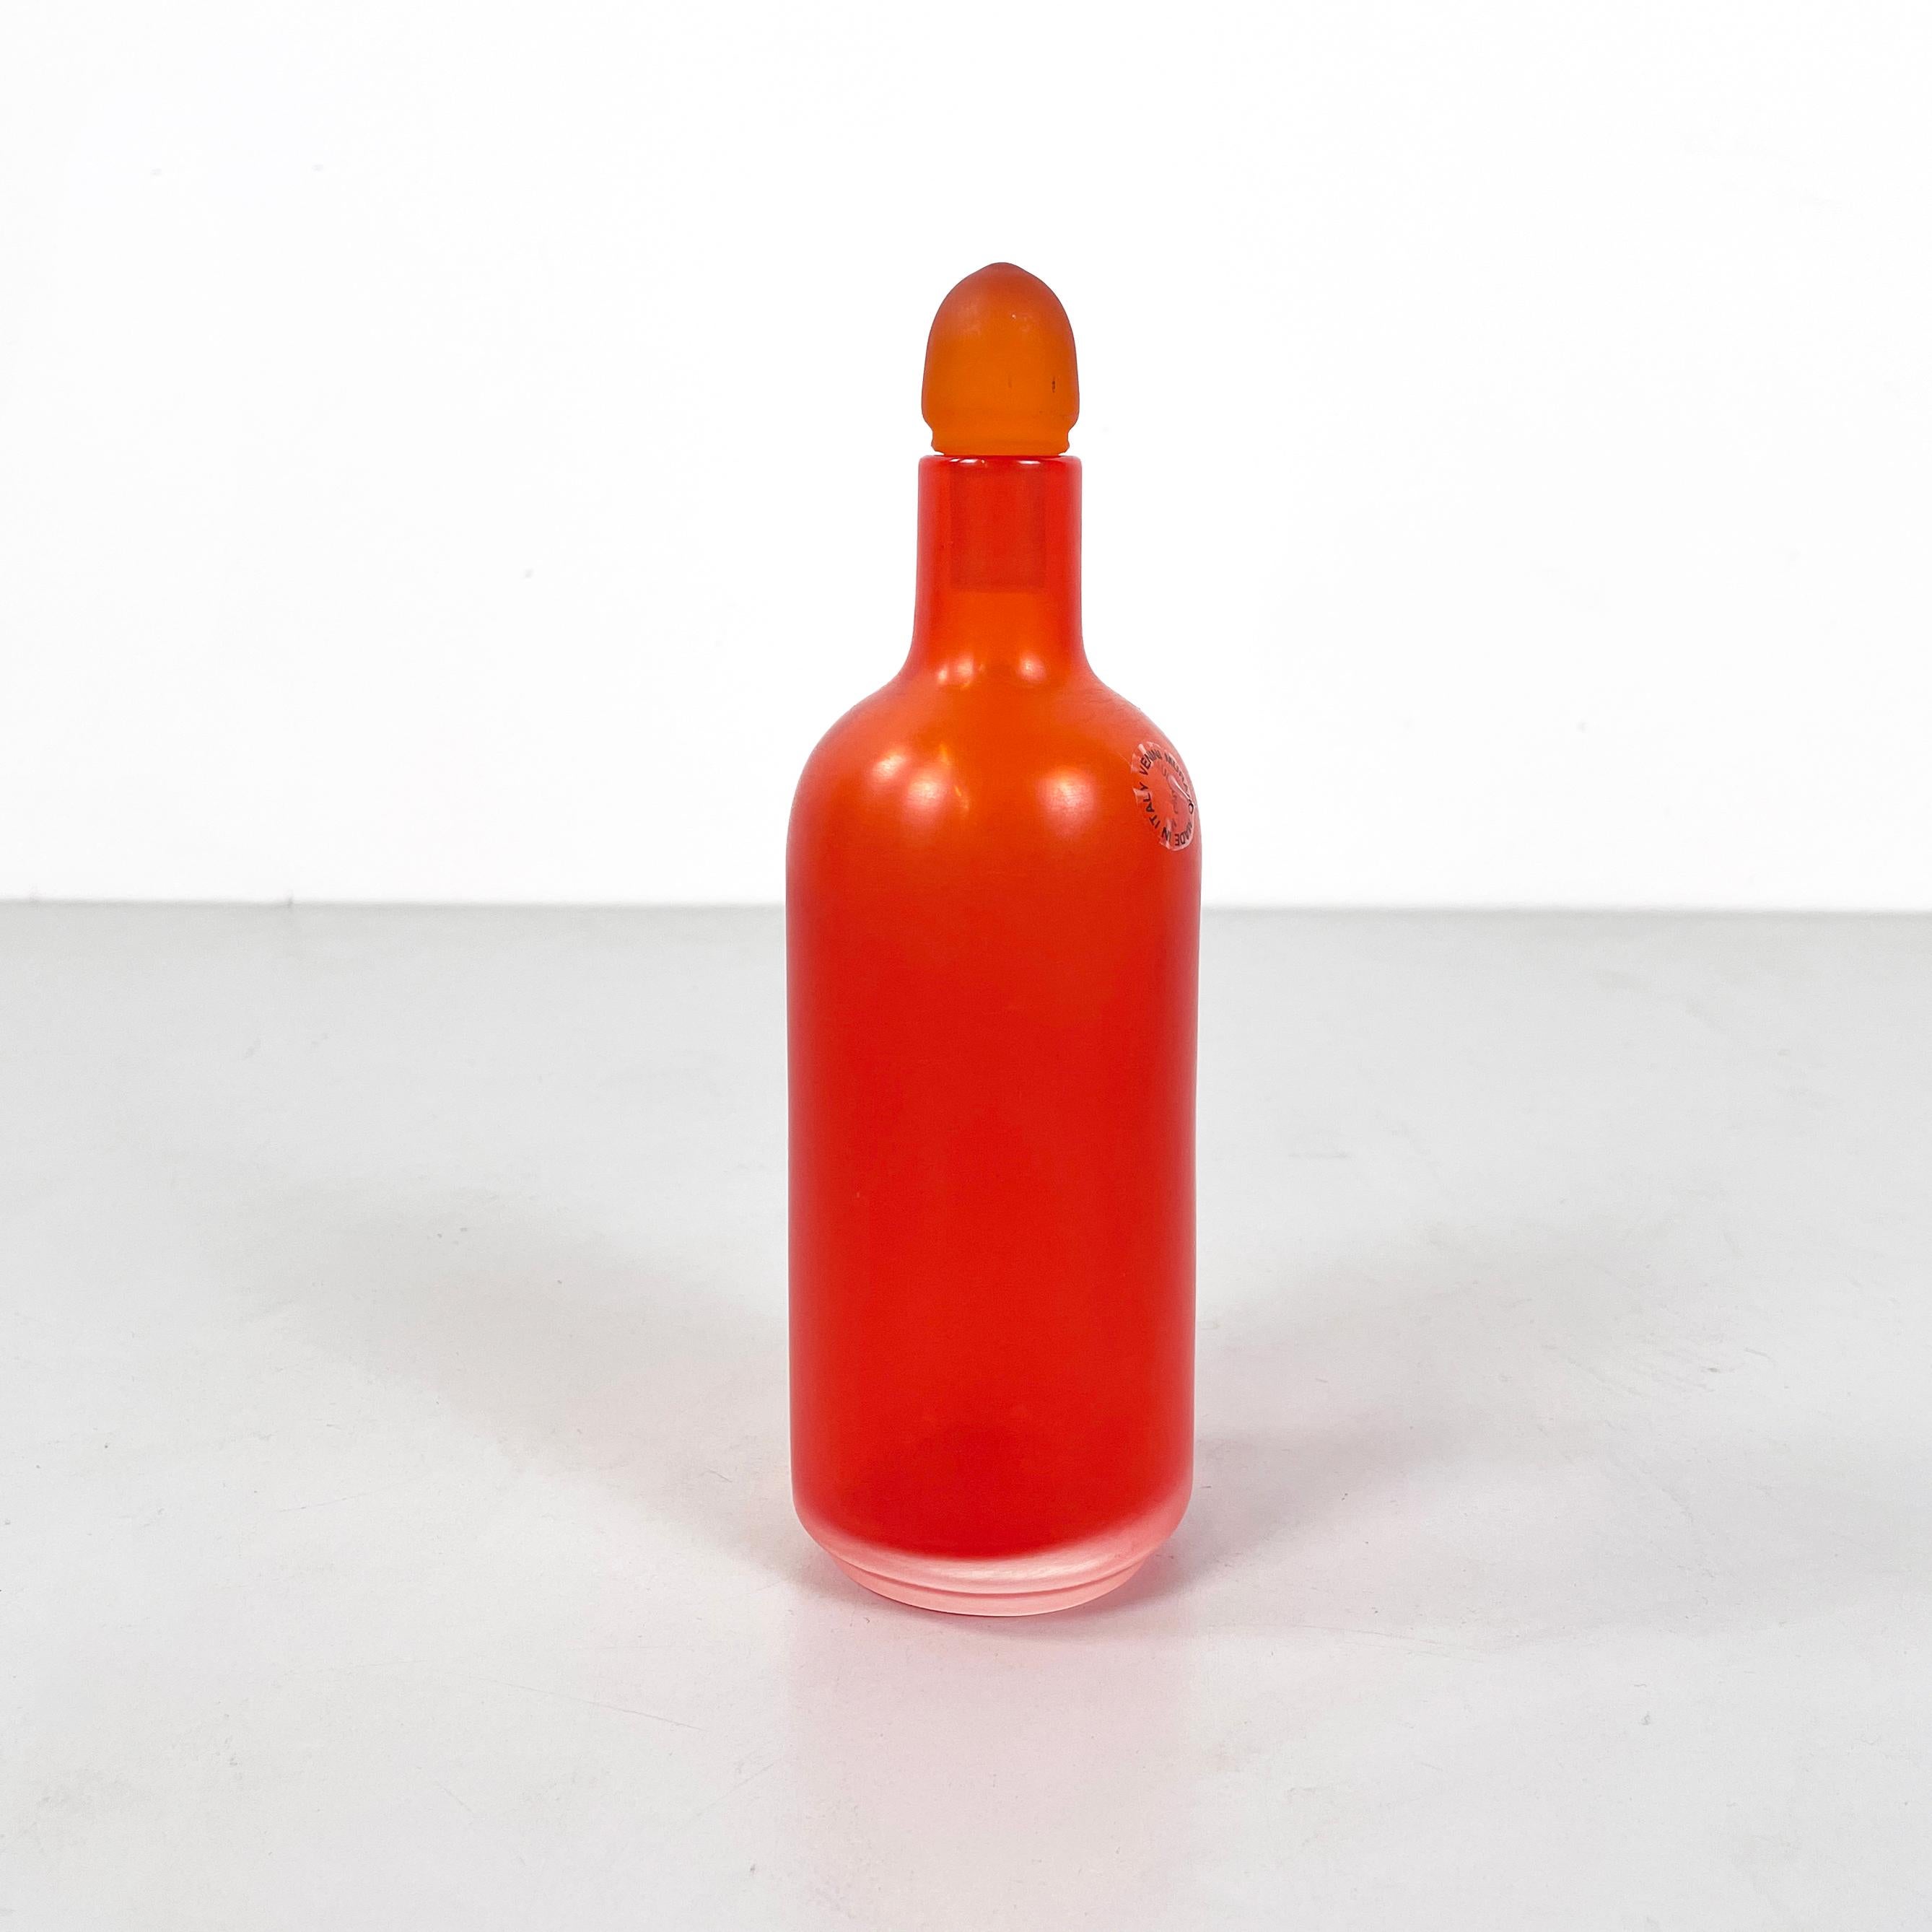 Italian modern Decorative bottle with cap in red Murano glass by Venini, 1990s
Decorative bottle with a round base in matt bright red Murano glass. The round base cap has a tapered shape.
Produced by Venini in 1990s. Label present
Very good